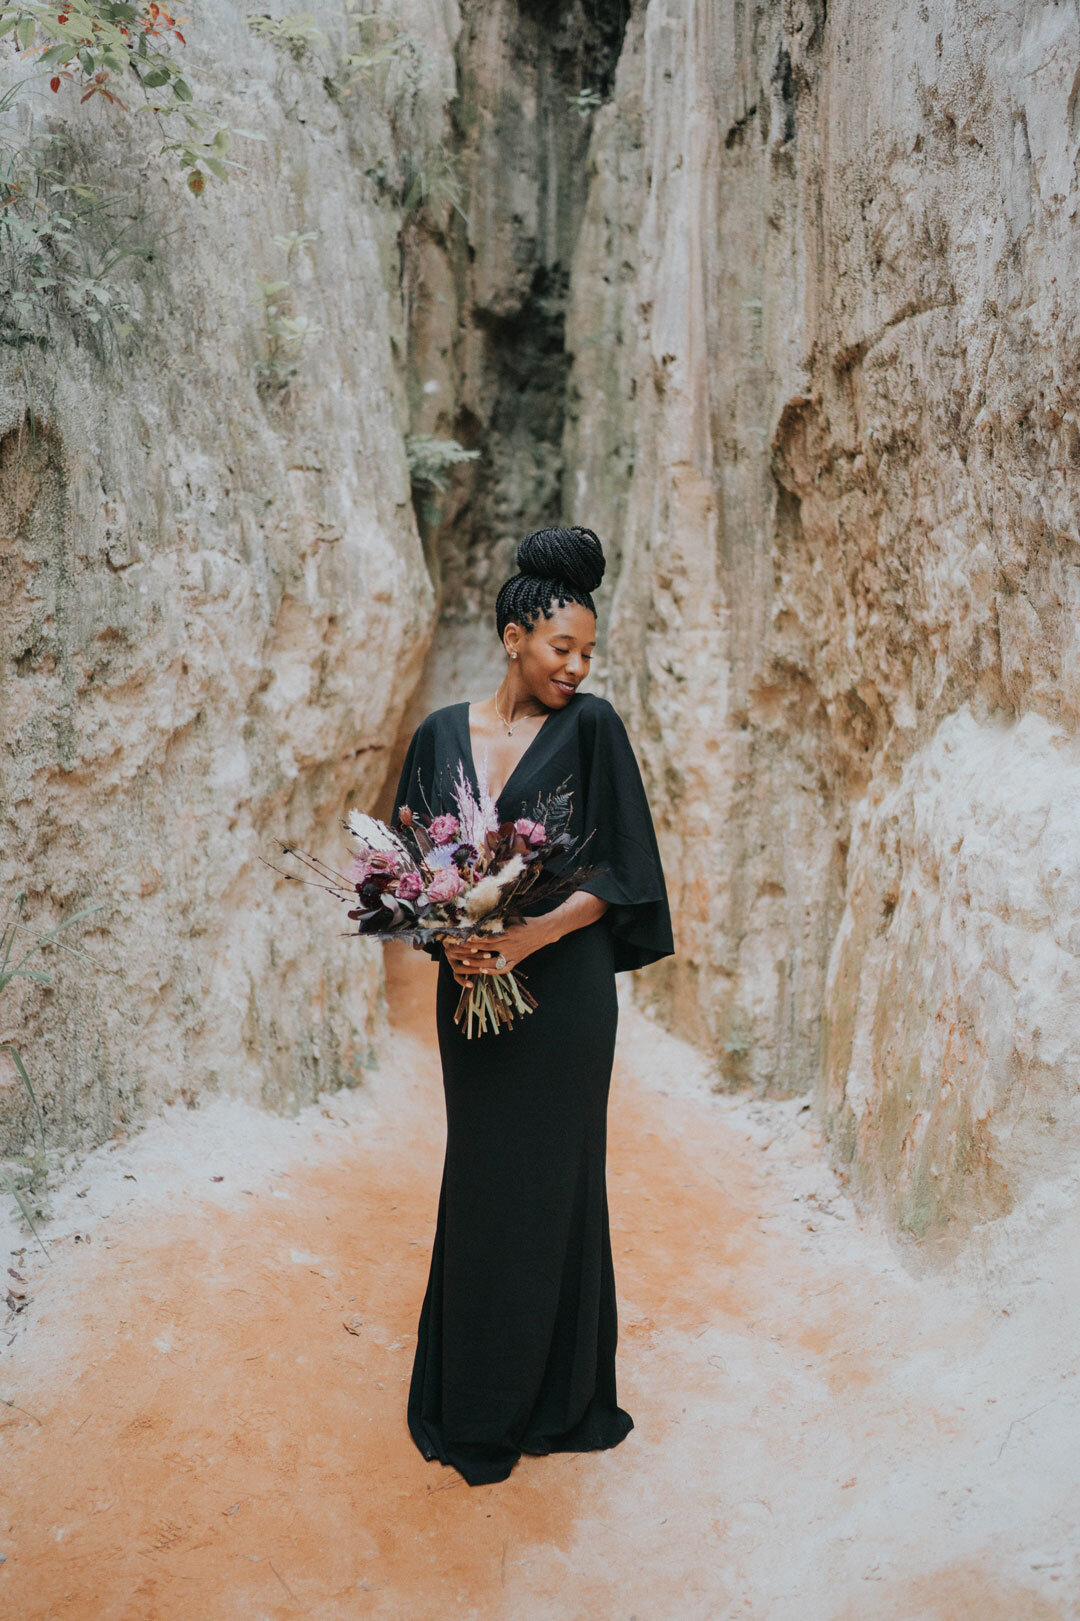 Black woman in black dress holding a pink bouquet